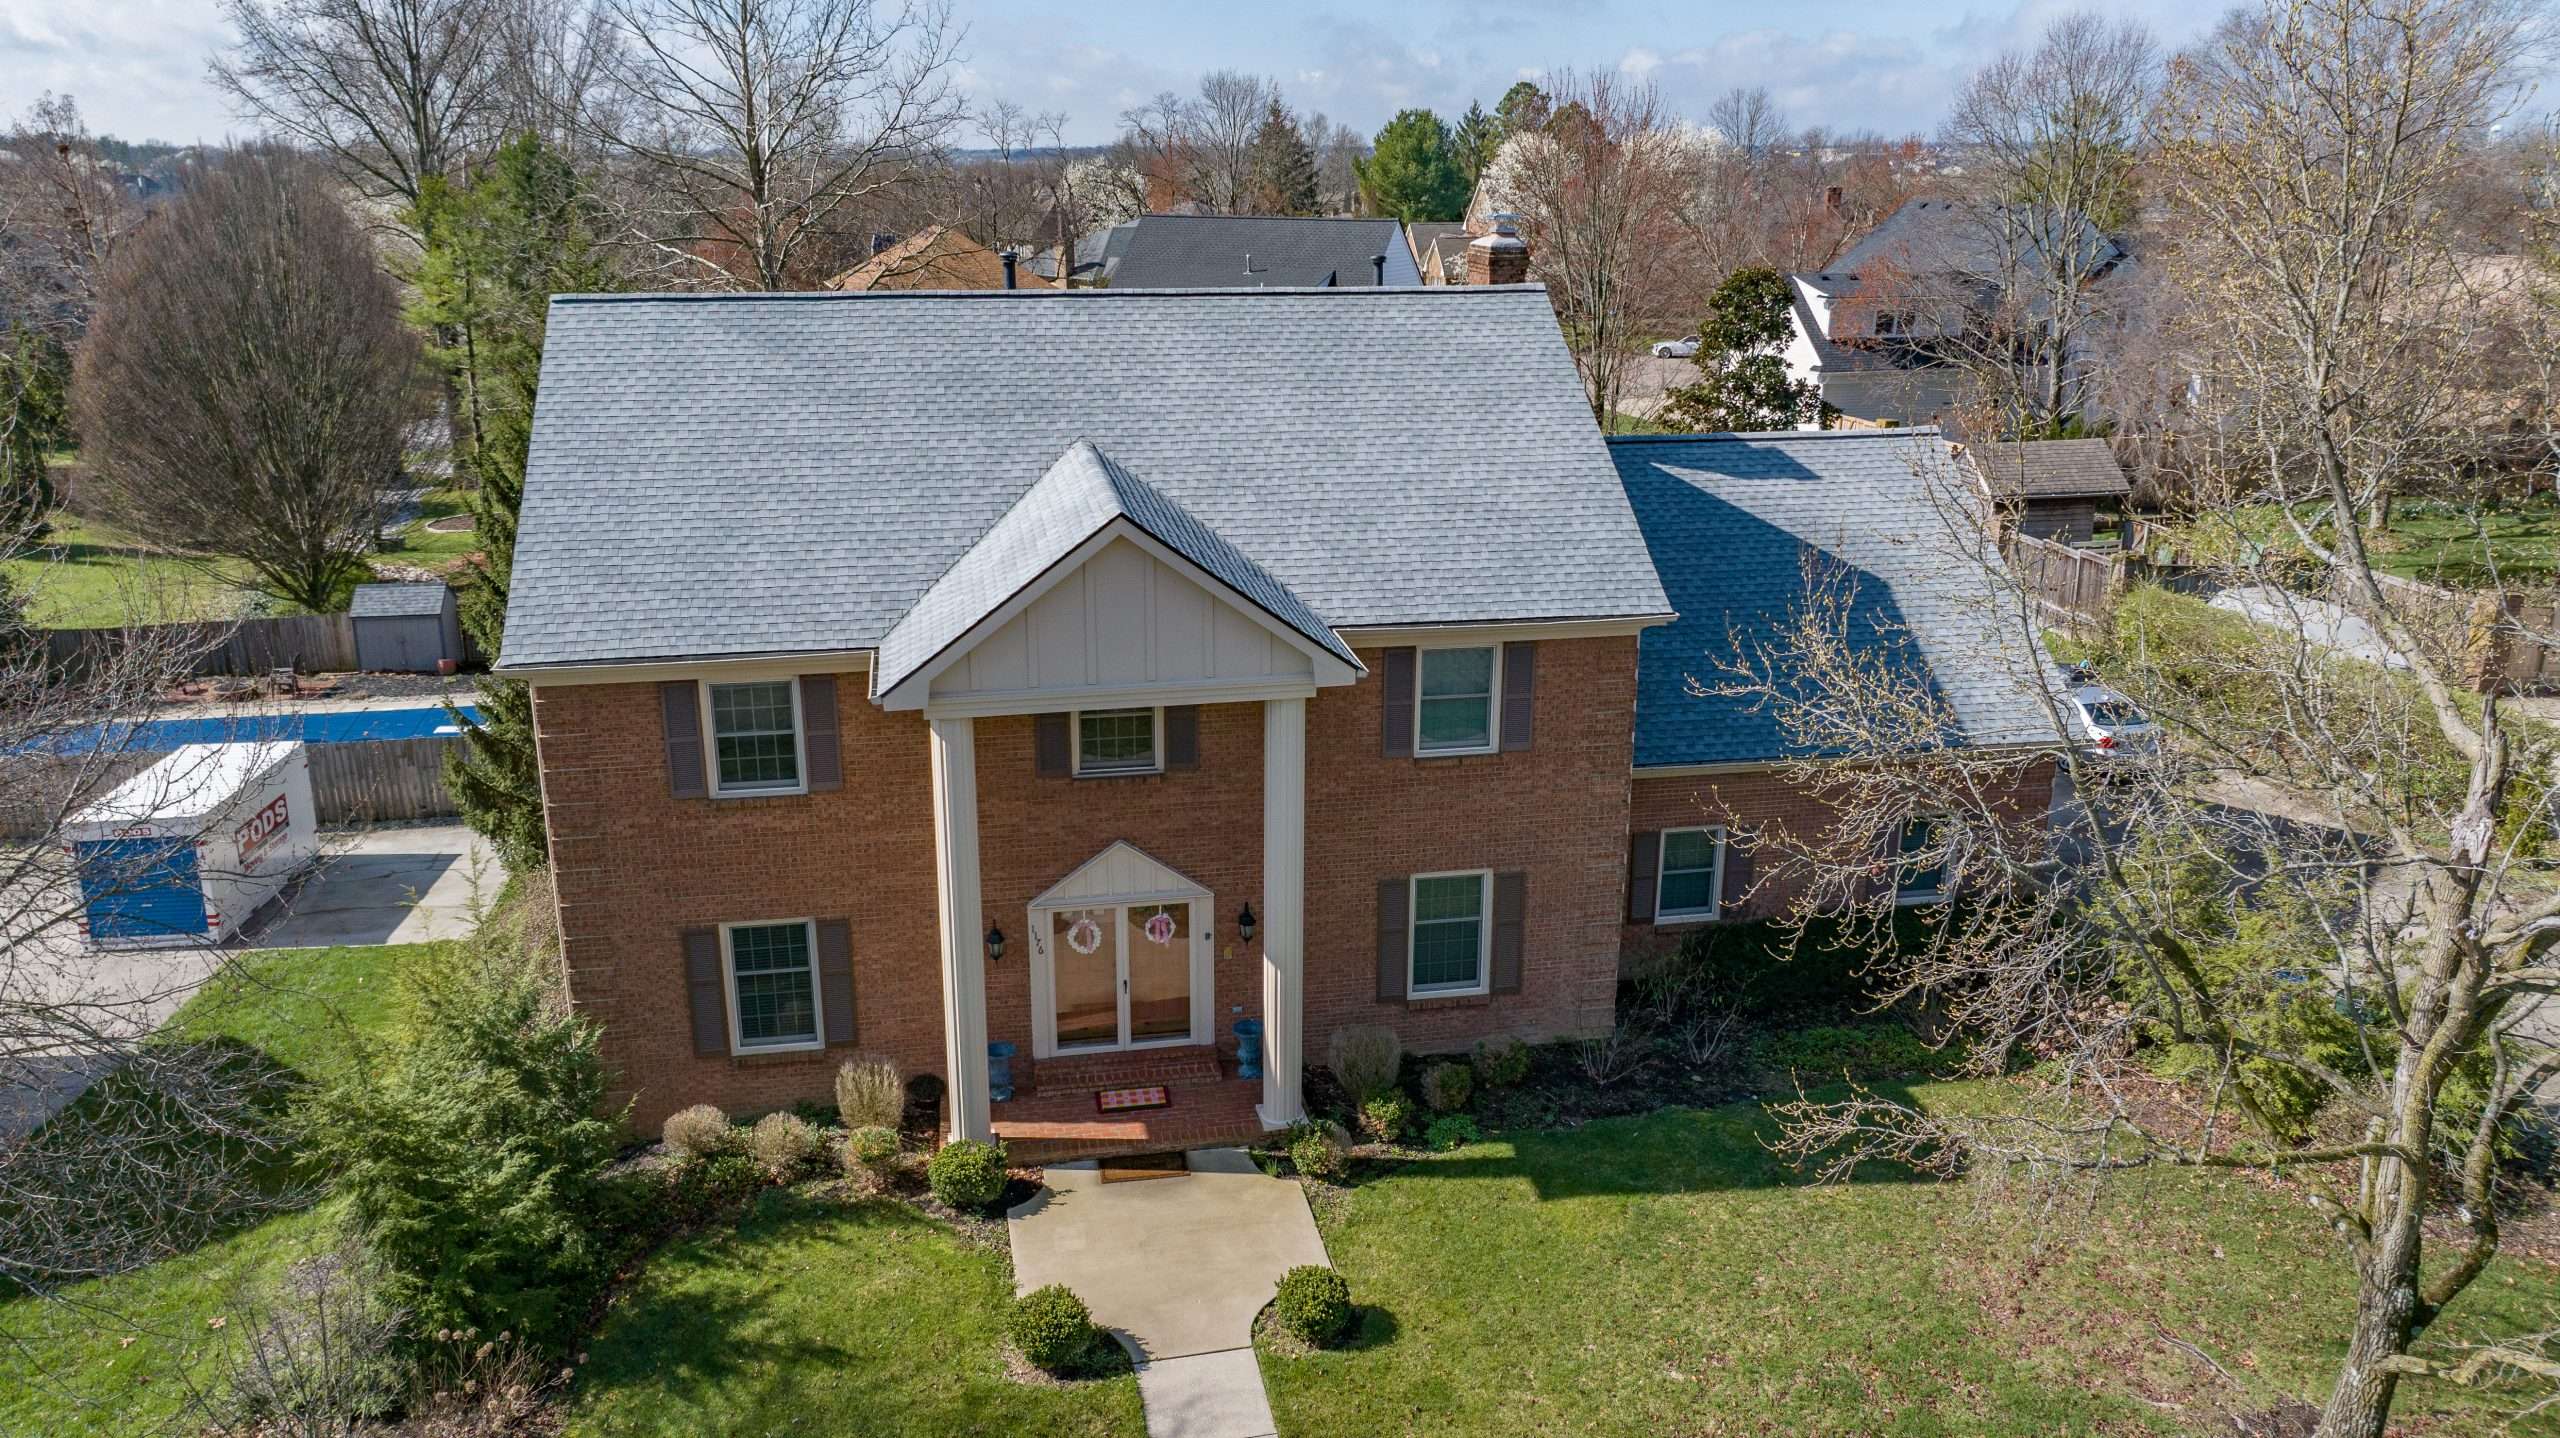 Brand new roof with a variegated gray color shingle from GAF called Appalachian Sky. AIC Roofing & Construction is the leading roofing company in Lexington, Louisville, and Cincinnati.